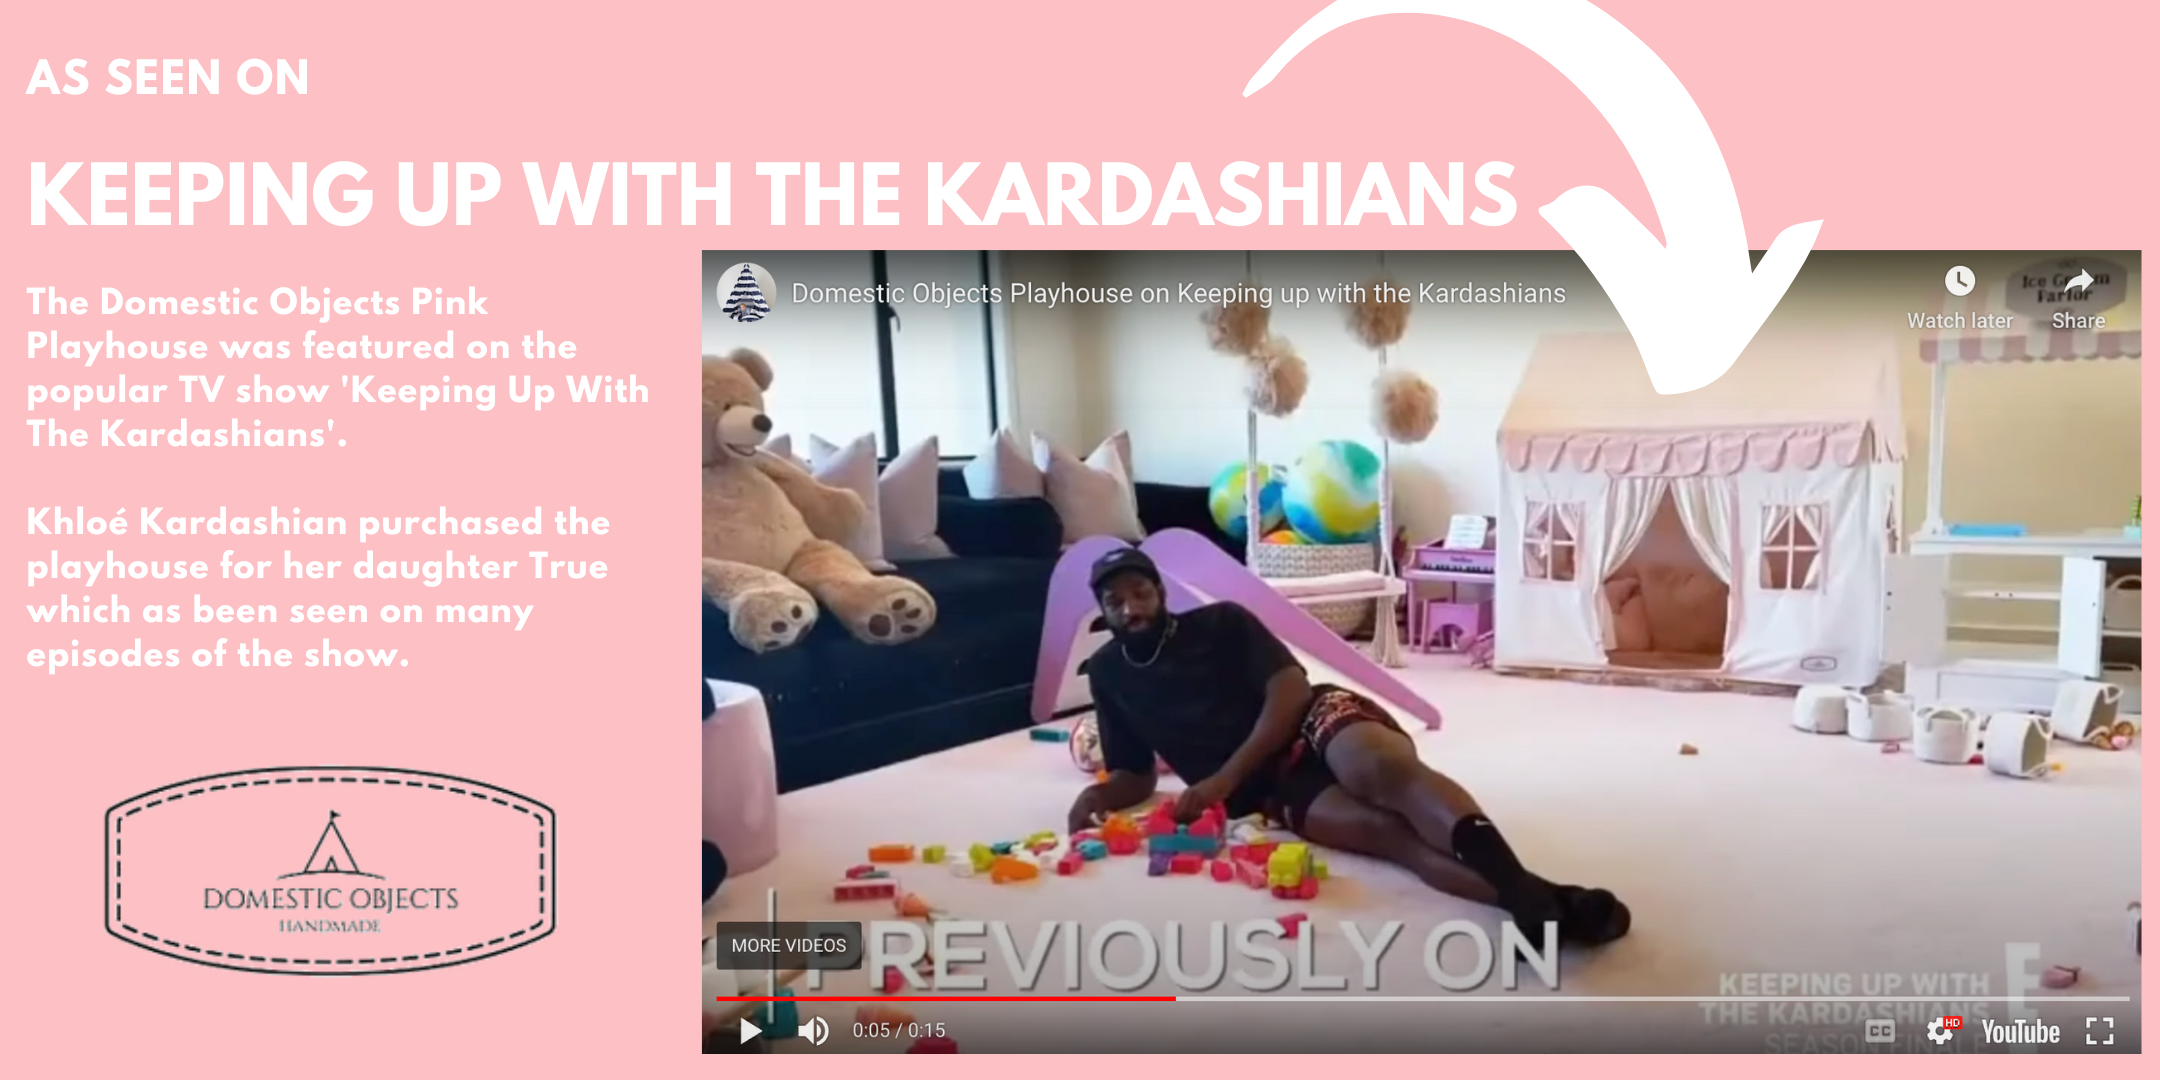 Pink Playhouse on Keeping up with the Kardashians Season Finale!